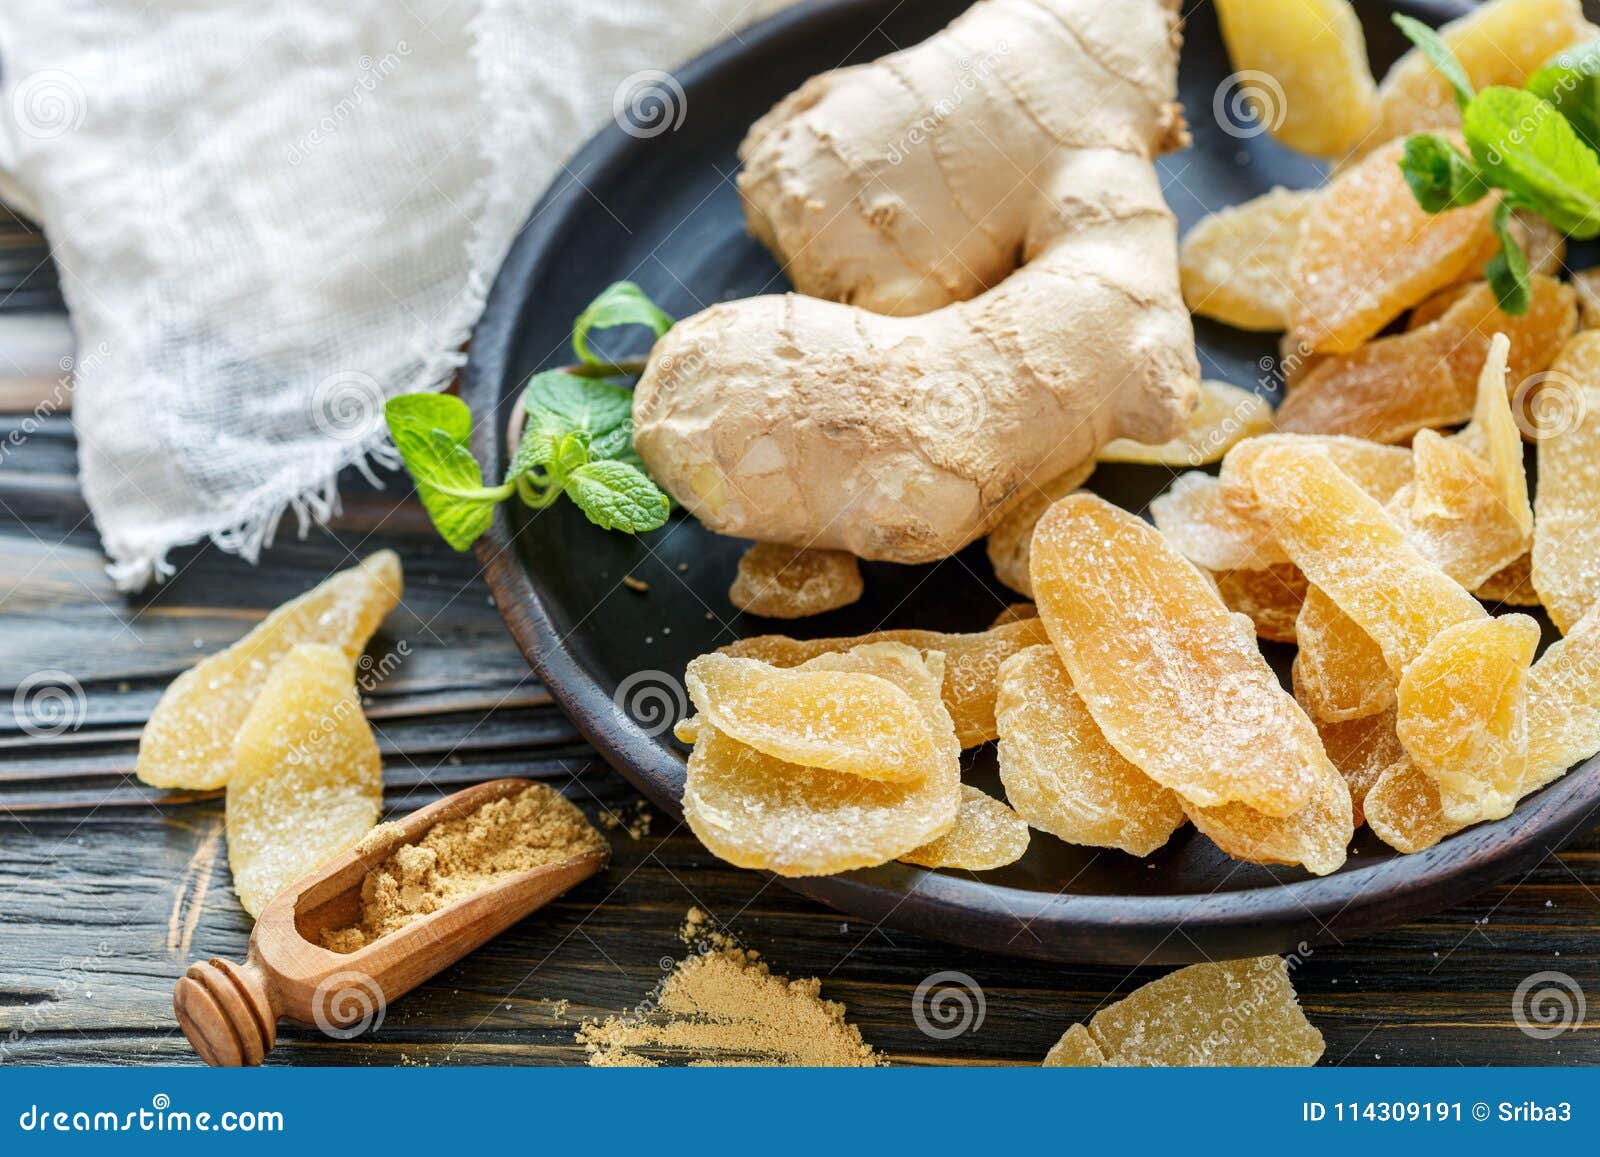 Root and Ground Ginger, Spicy Ginger Candied Fruit. Stock Image - Image ...